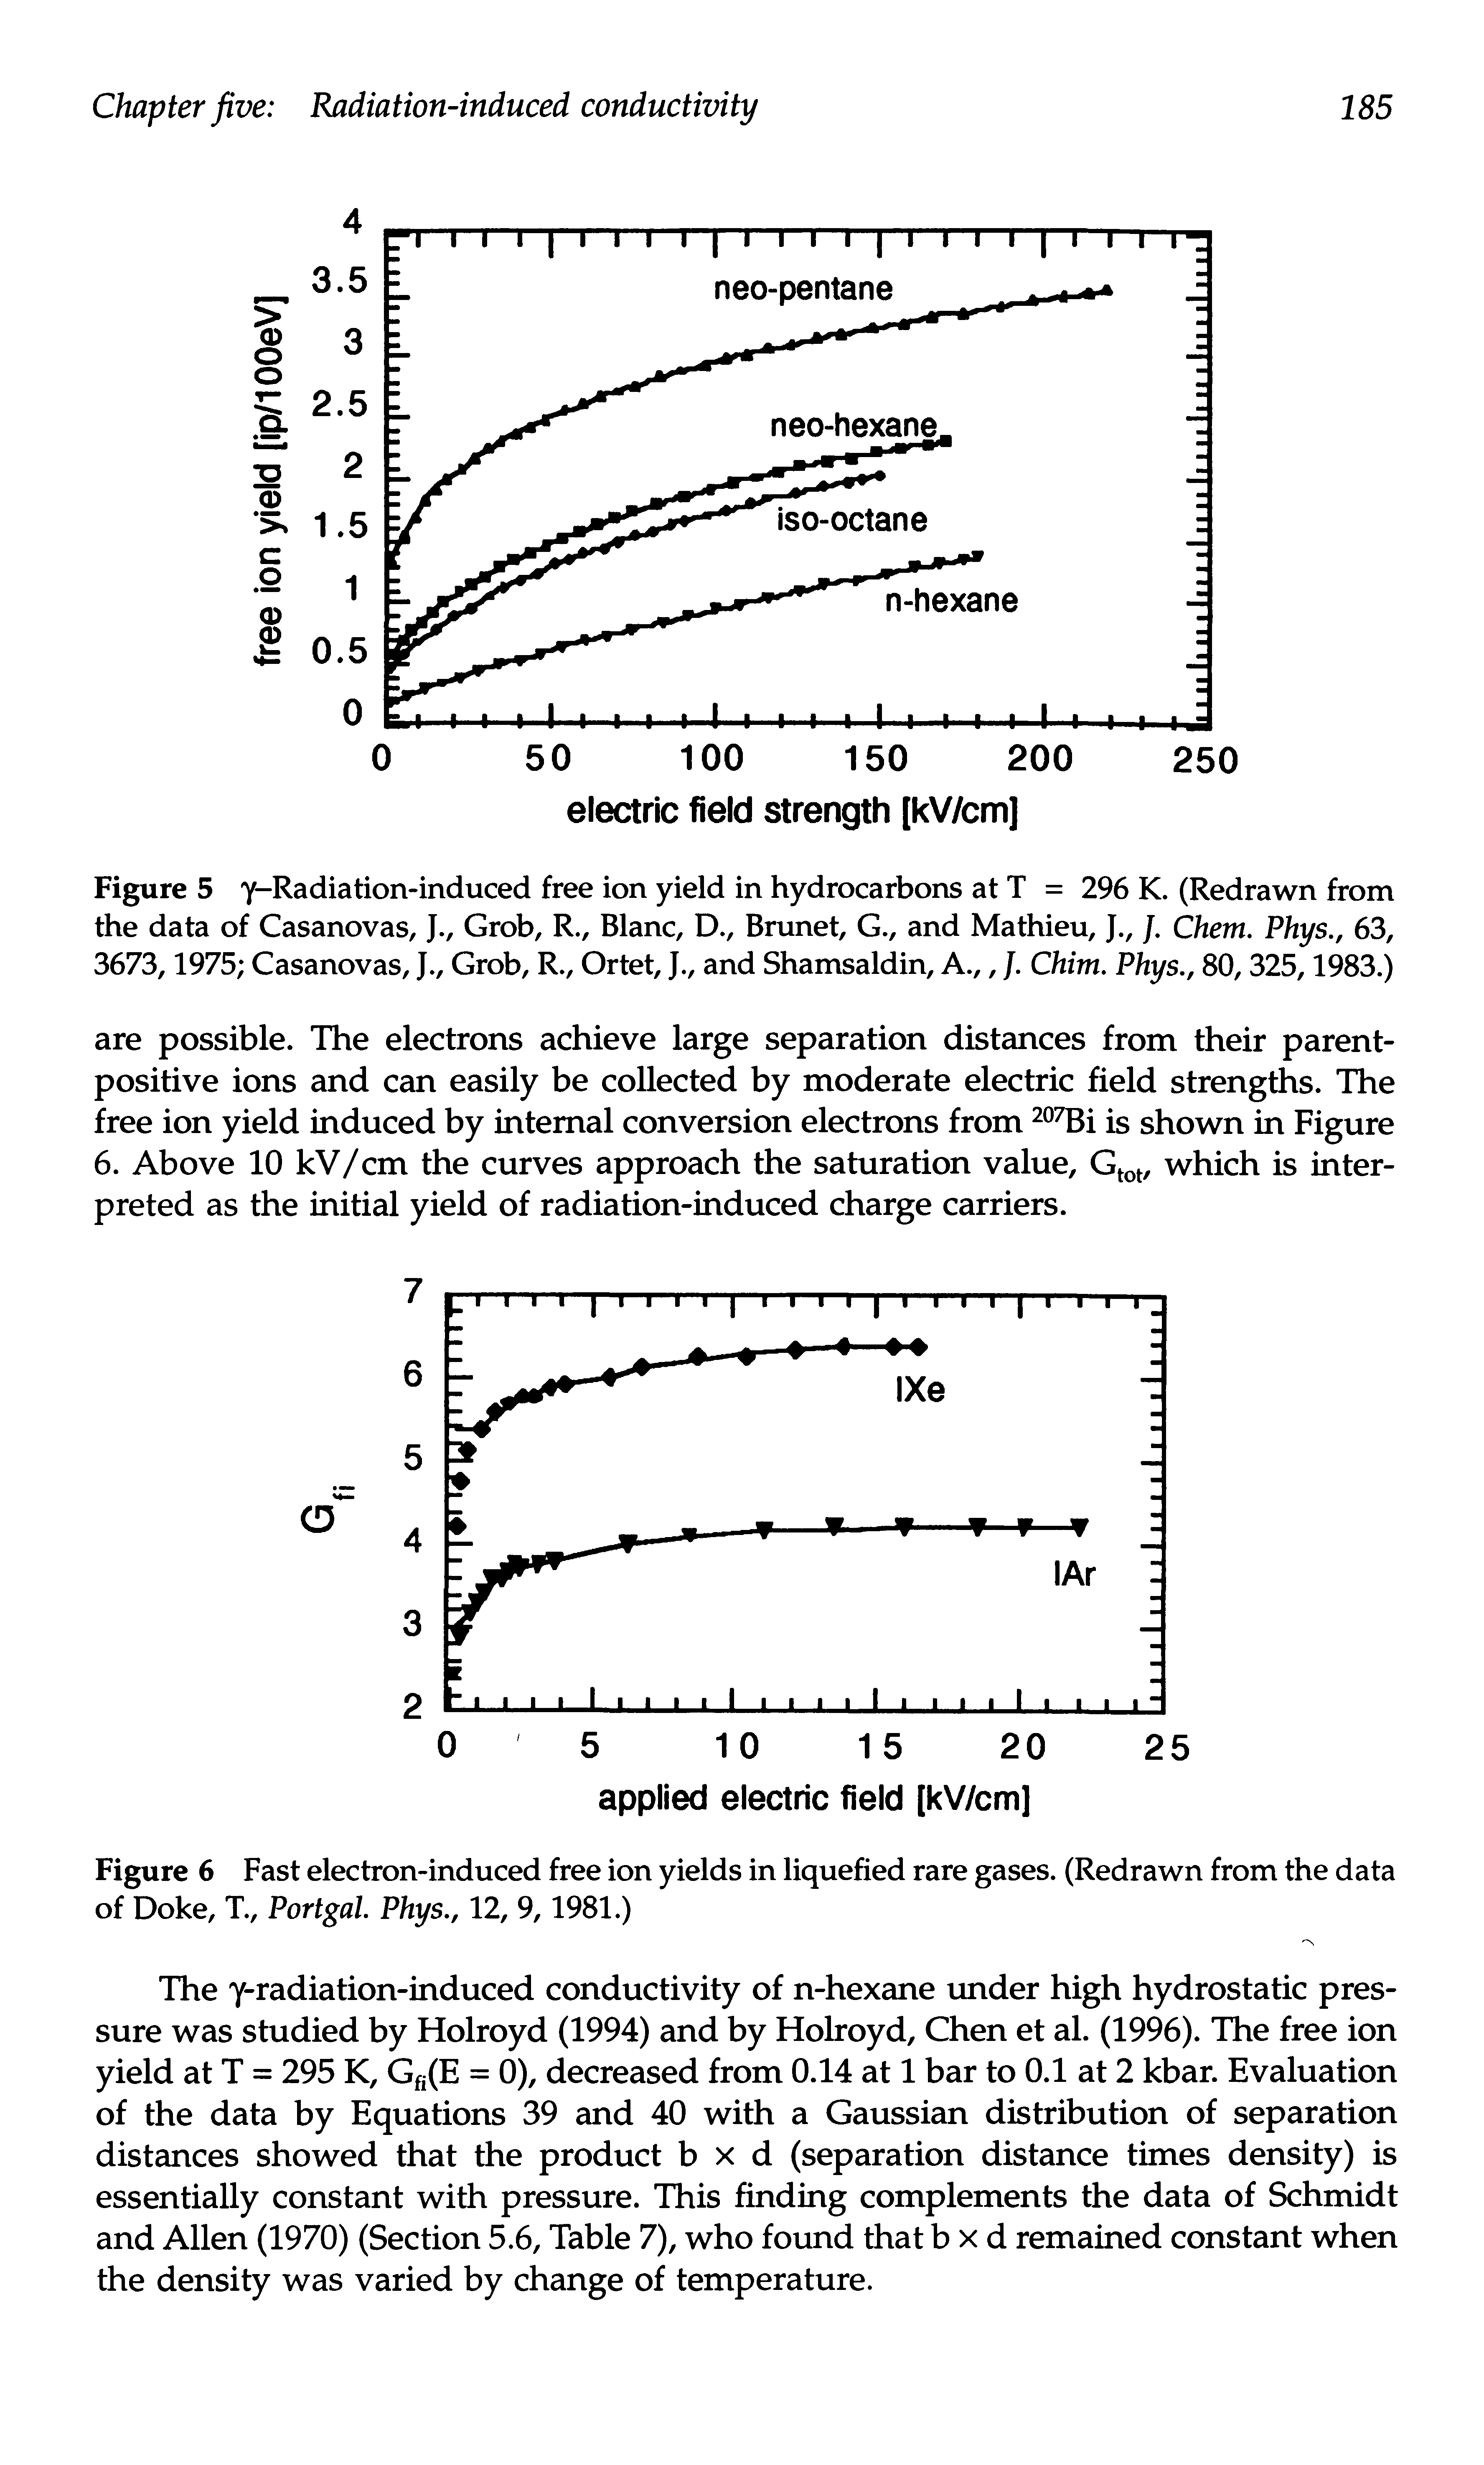 Figure 6 Fast electron-induced free ion yields in liquefied rare gases. (Redrawn from the data of Doke, T., Portgal Phys., 12, 9,1981.)...